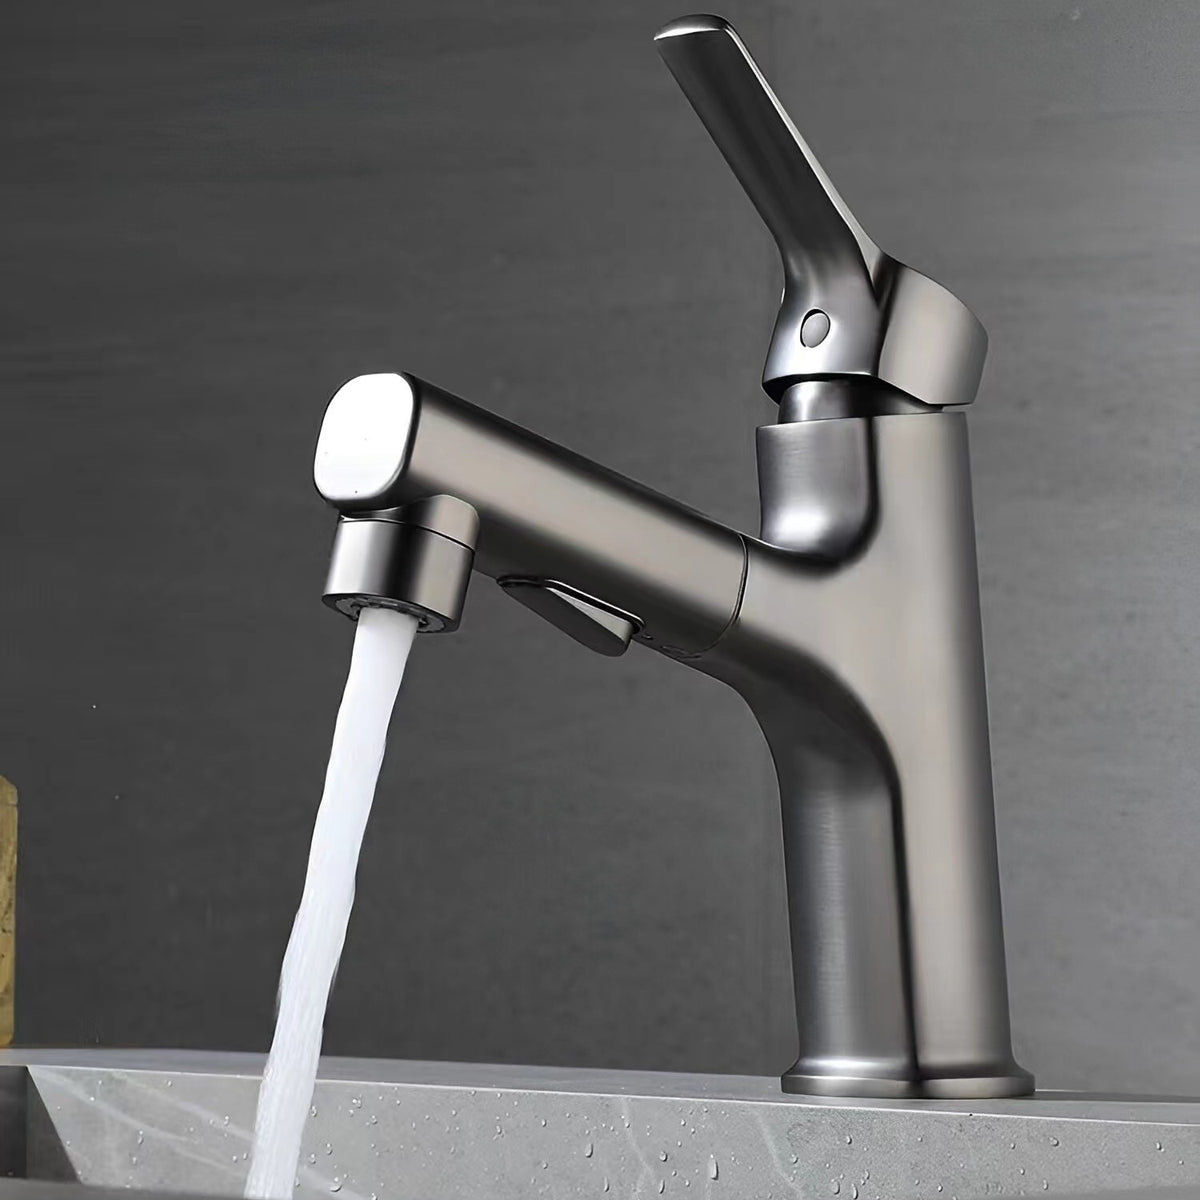 2 Modes Hot and Cold Pull-Out Bathroom Basin Taps_Gunmetal Gray